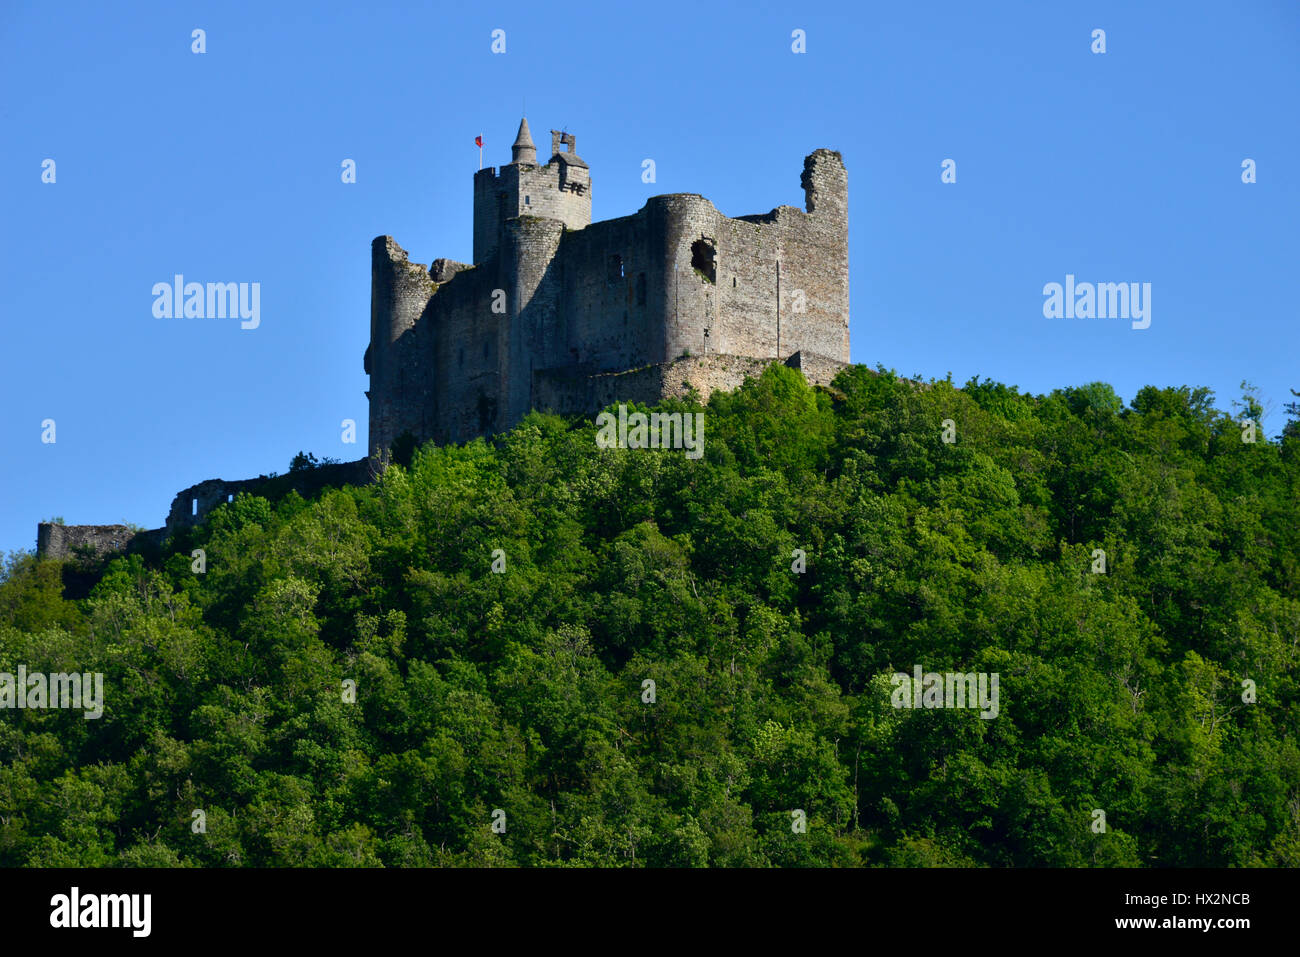 The ruins of the Castle of Najac, in the Occitanie region of southern France. Stock Photo